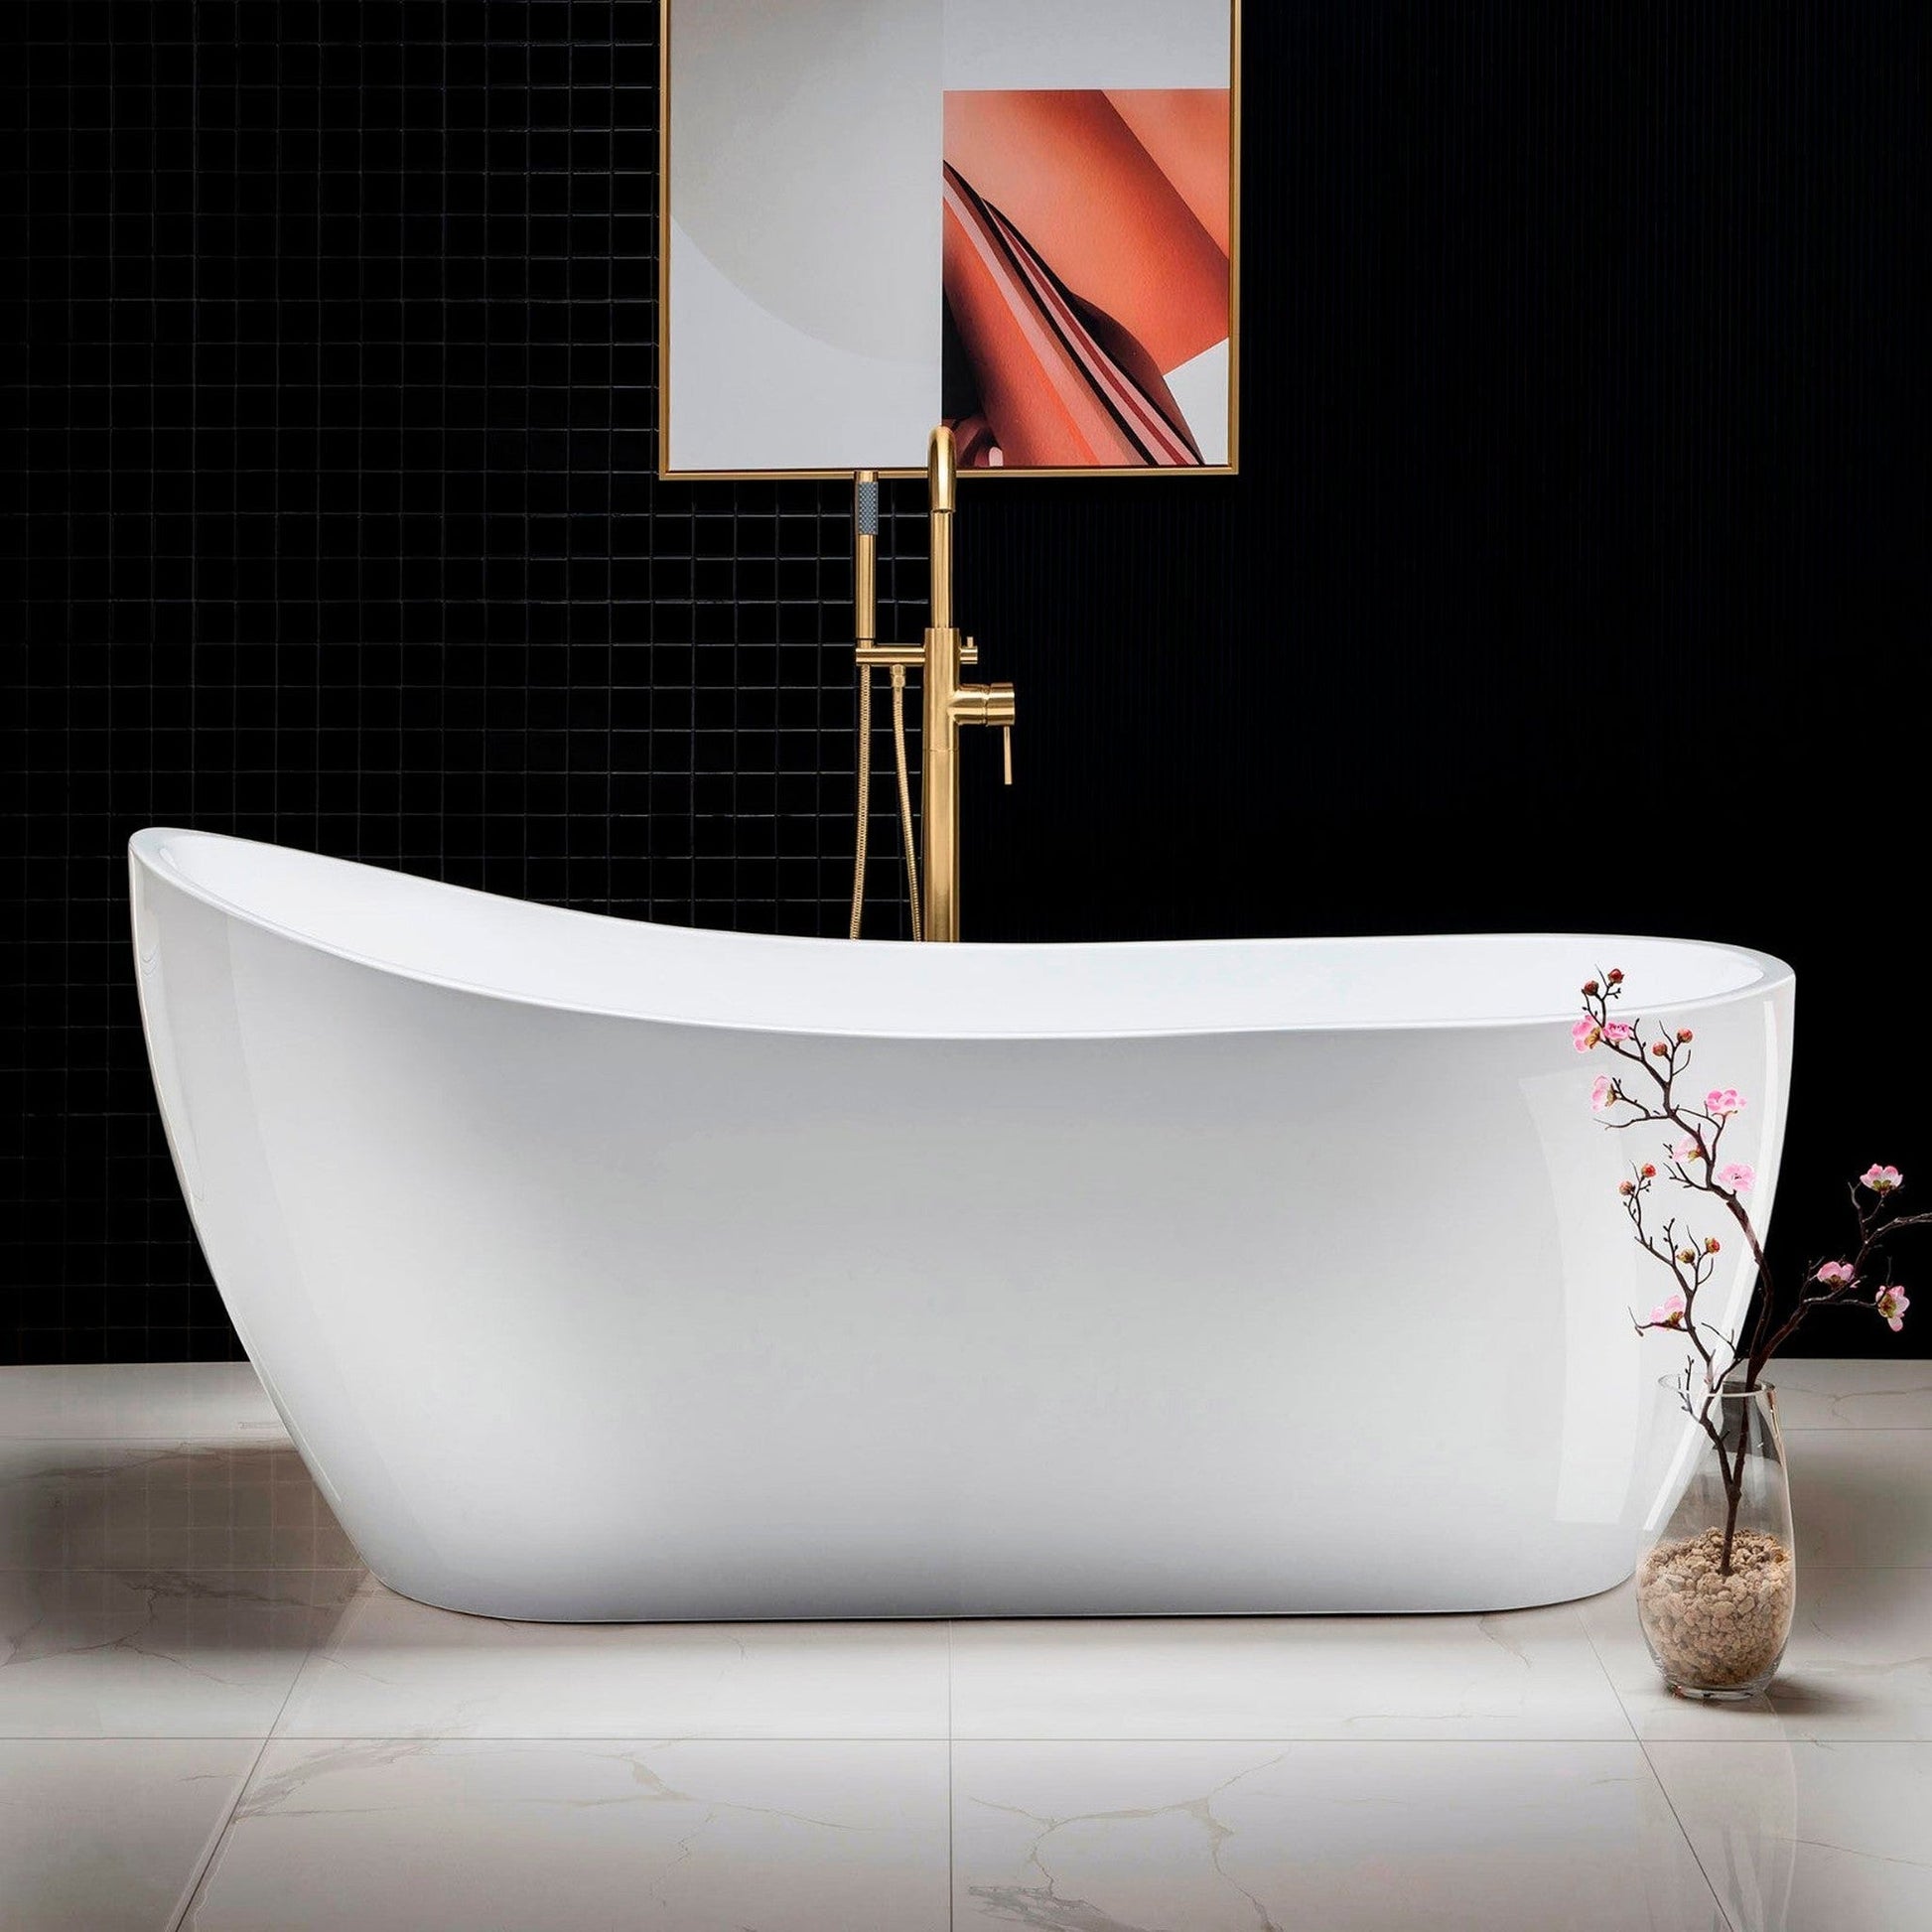 WoodBridge B0001 67" White Acrylic Freestanding Soaking Bathtub With Brushed Gold Drain, Overflow, F0073BGVT Tub Filler and Caddy Tray